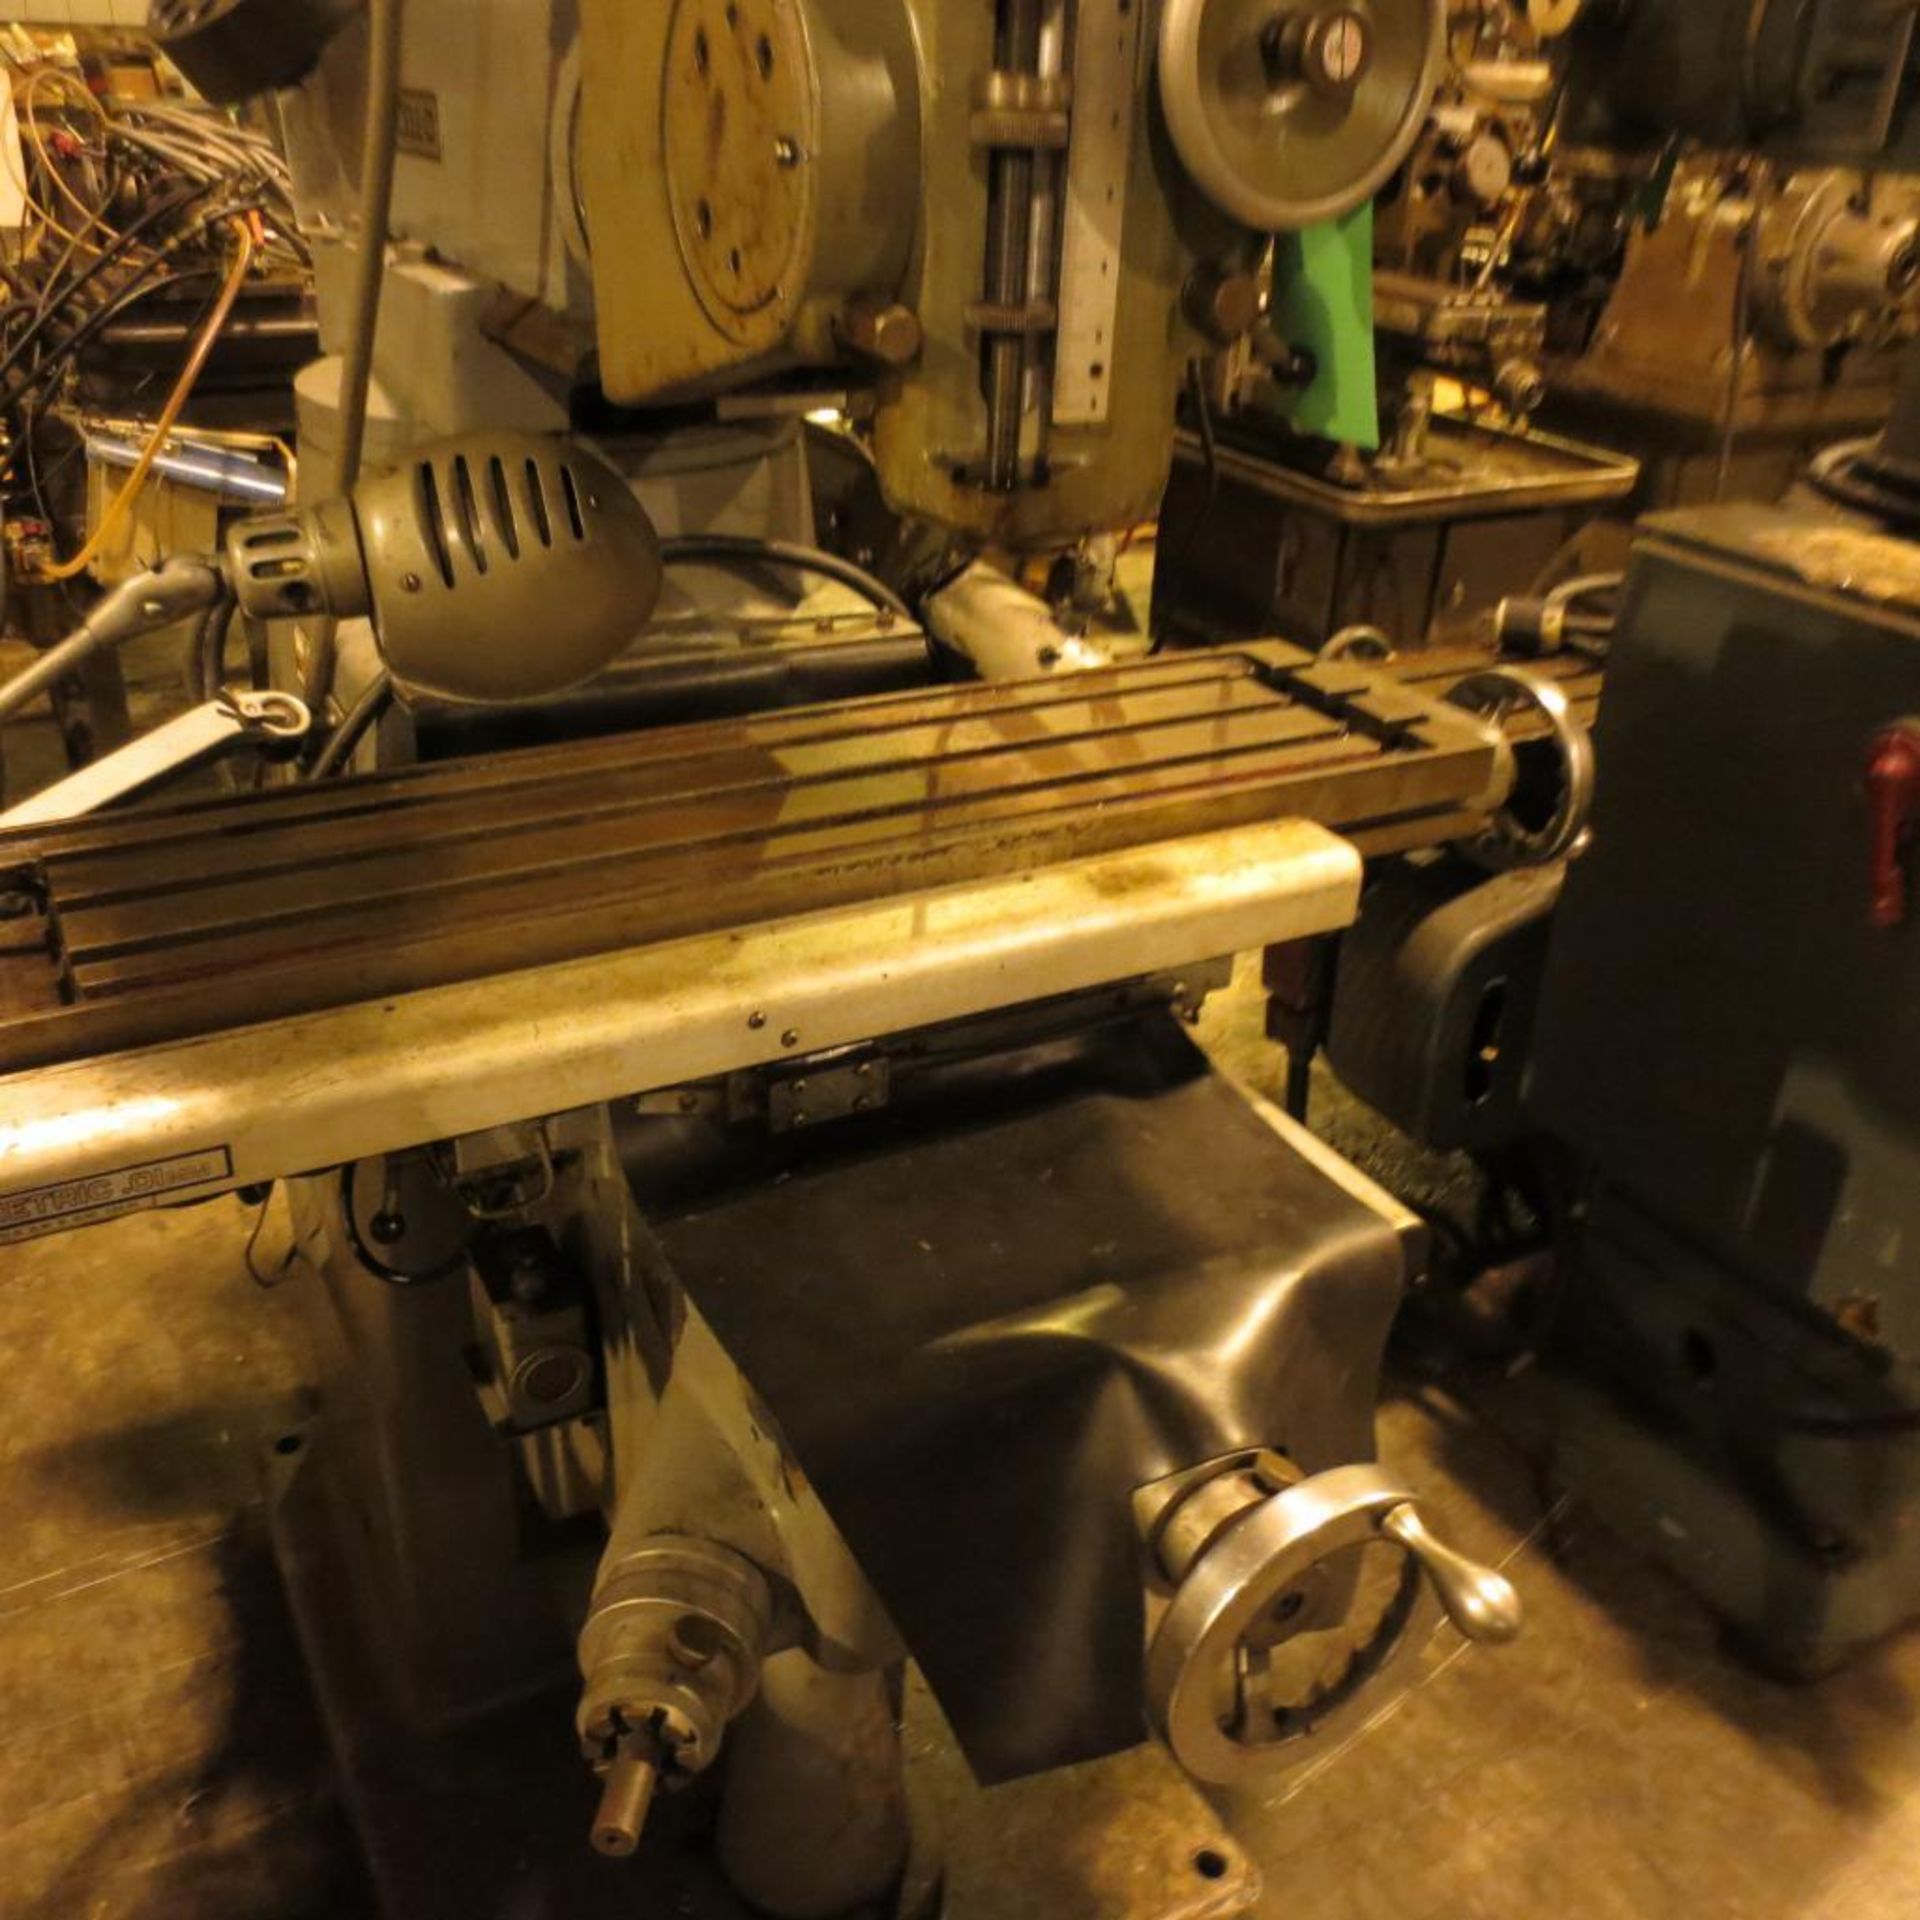 Excello Vertical Milling machine, 39"x9" Table with miniwizard XY Read Out *RIGGING $65* - Image 4 of 4